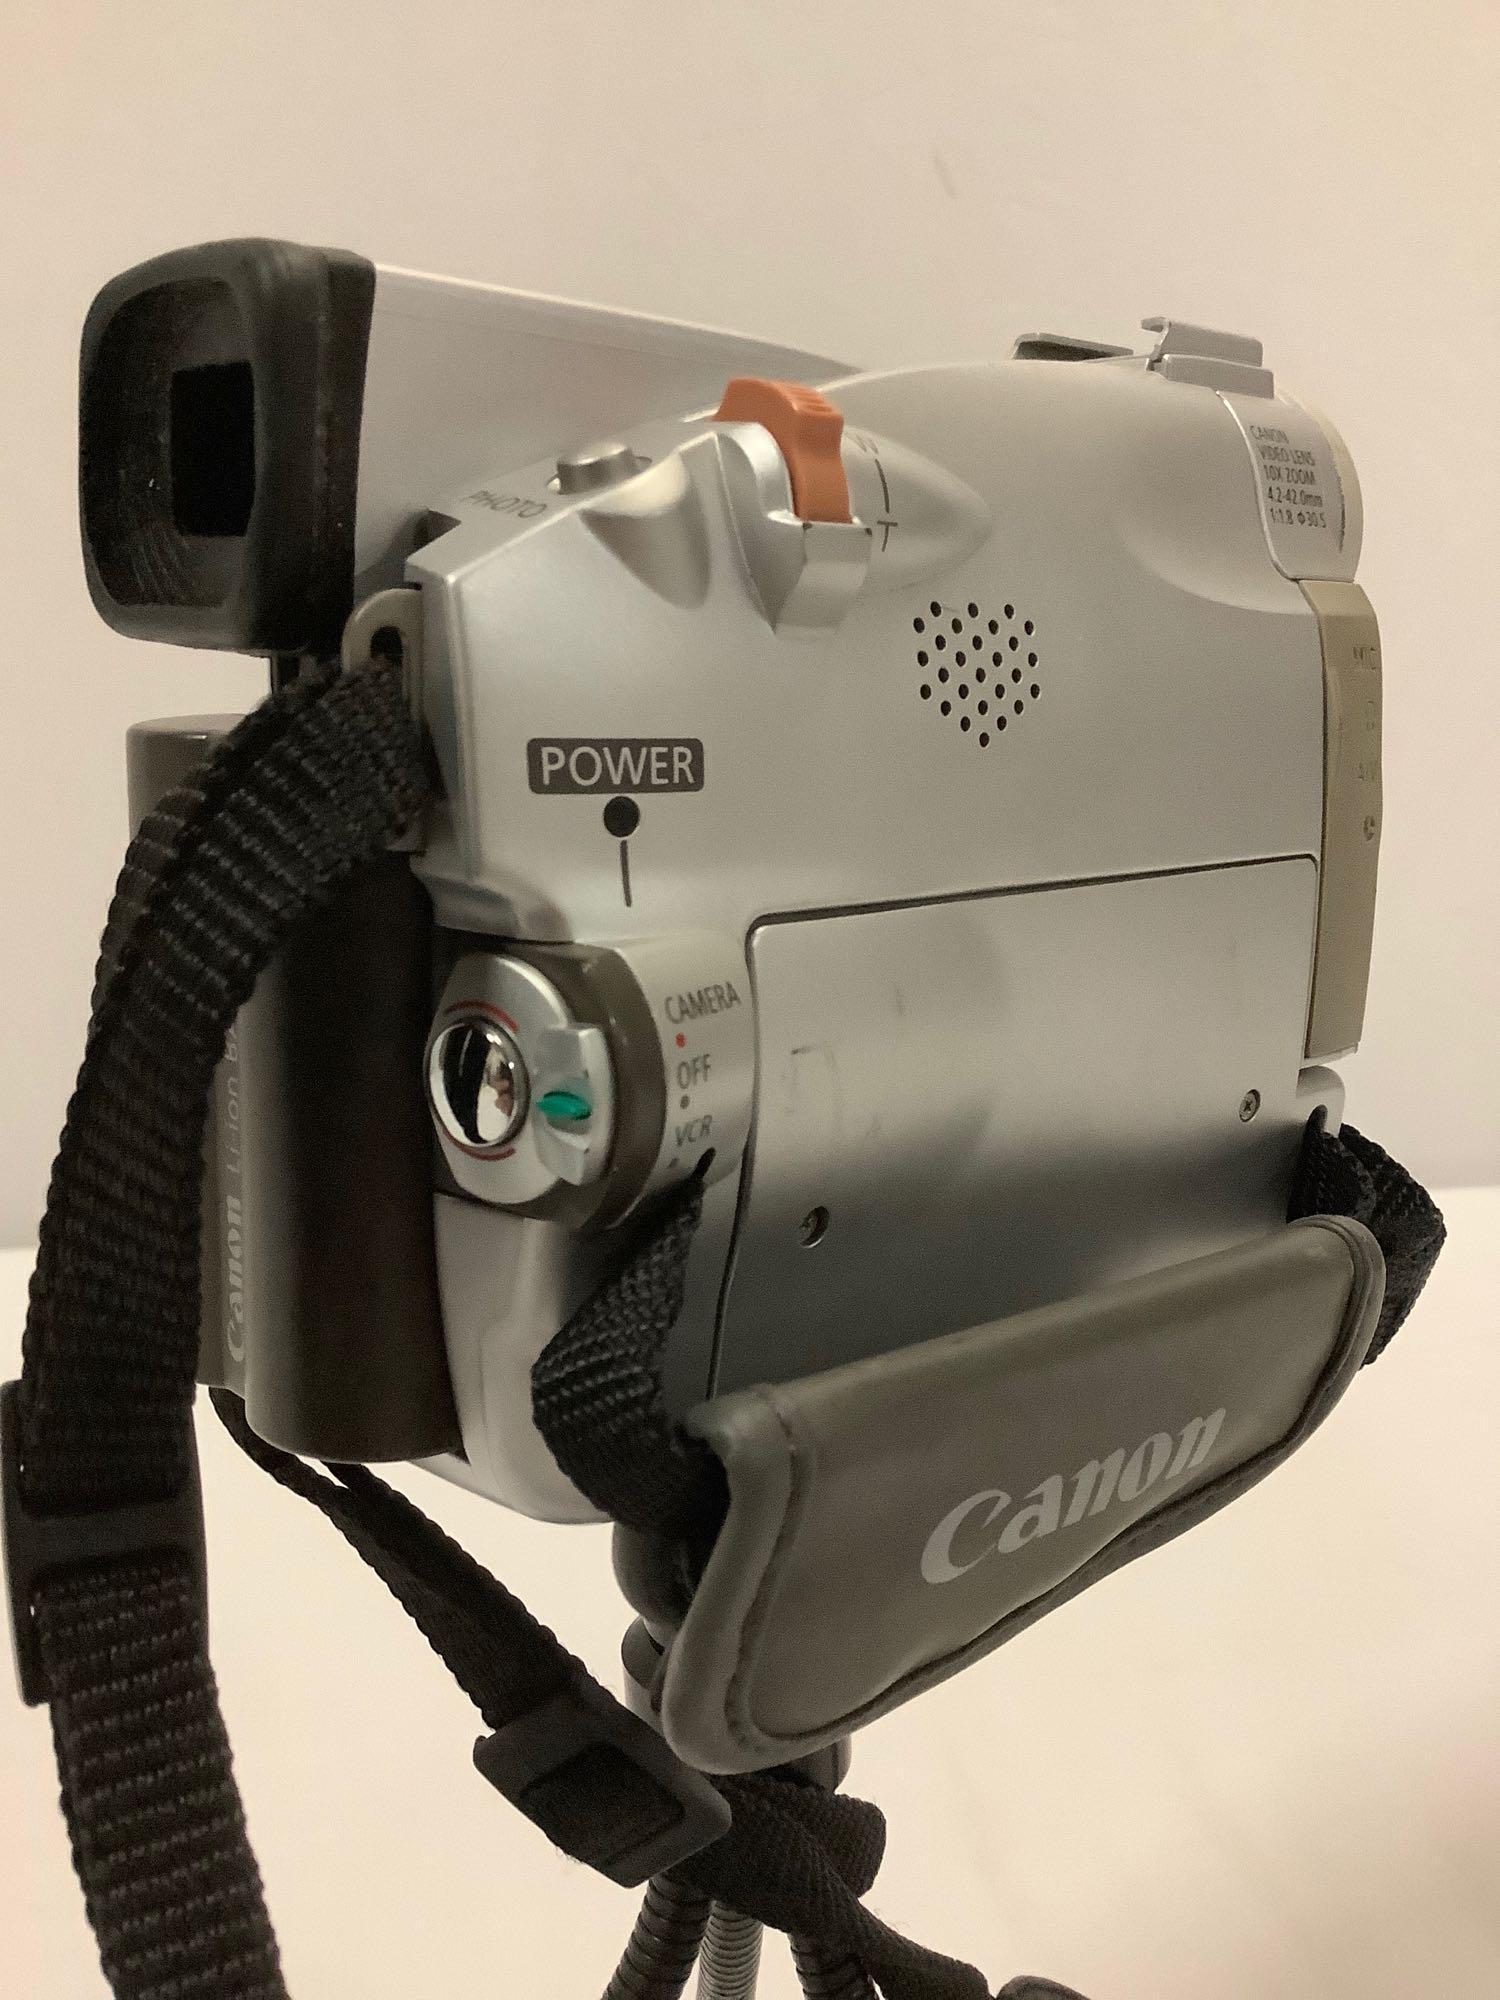 Canon ZR10 Digital Video Camera, 200x digital zoom, untested, sold as is.